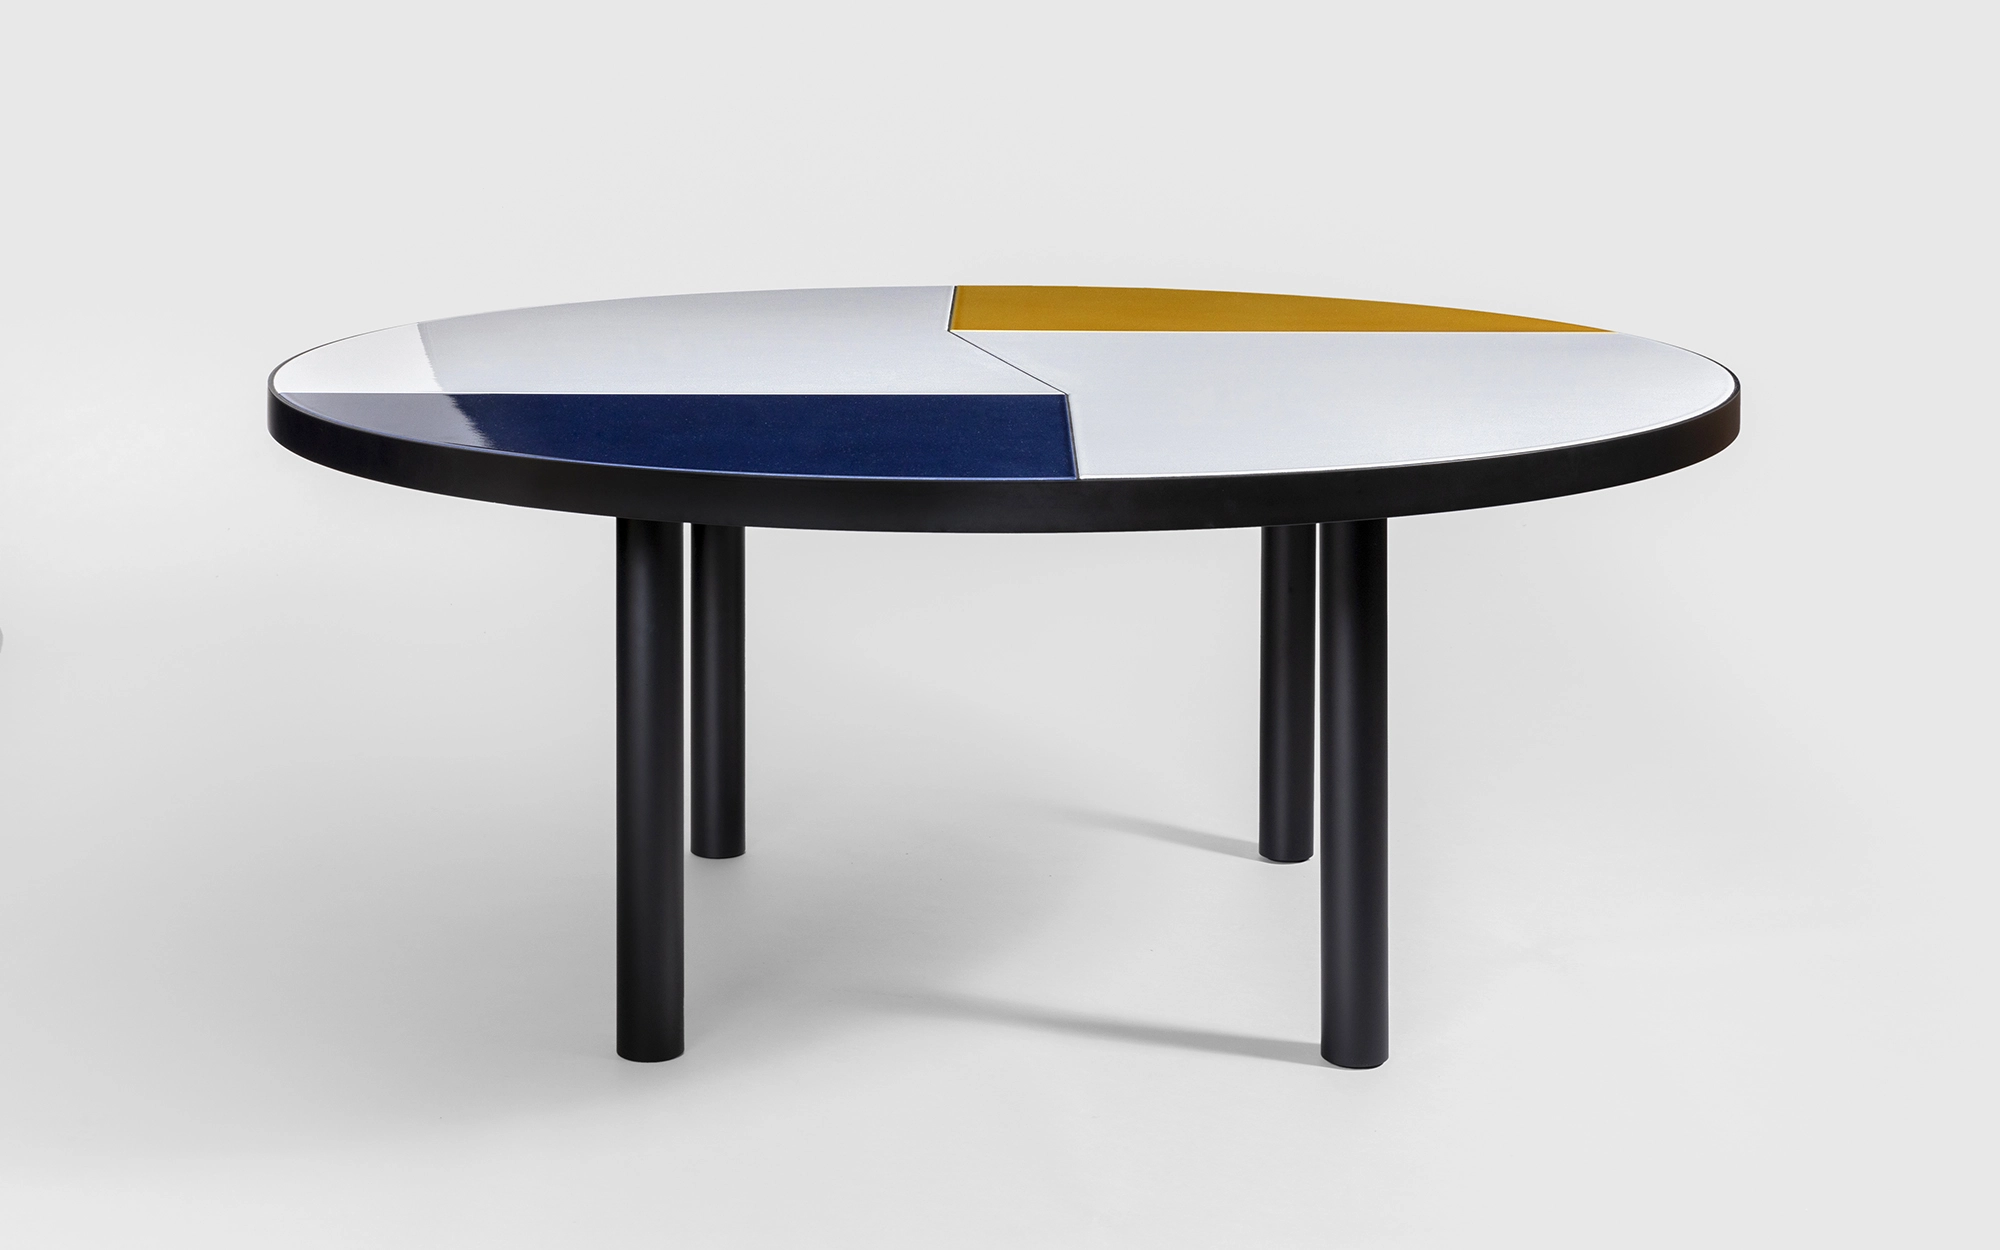 Fraction Dining Table - Pierre Charpin - Stool - Galerie kreo